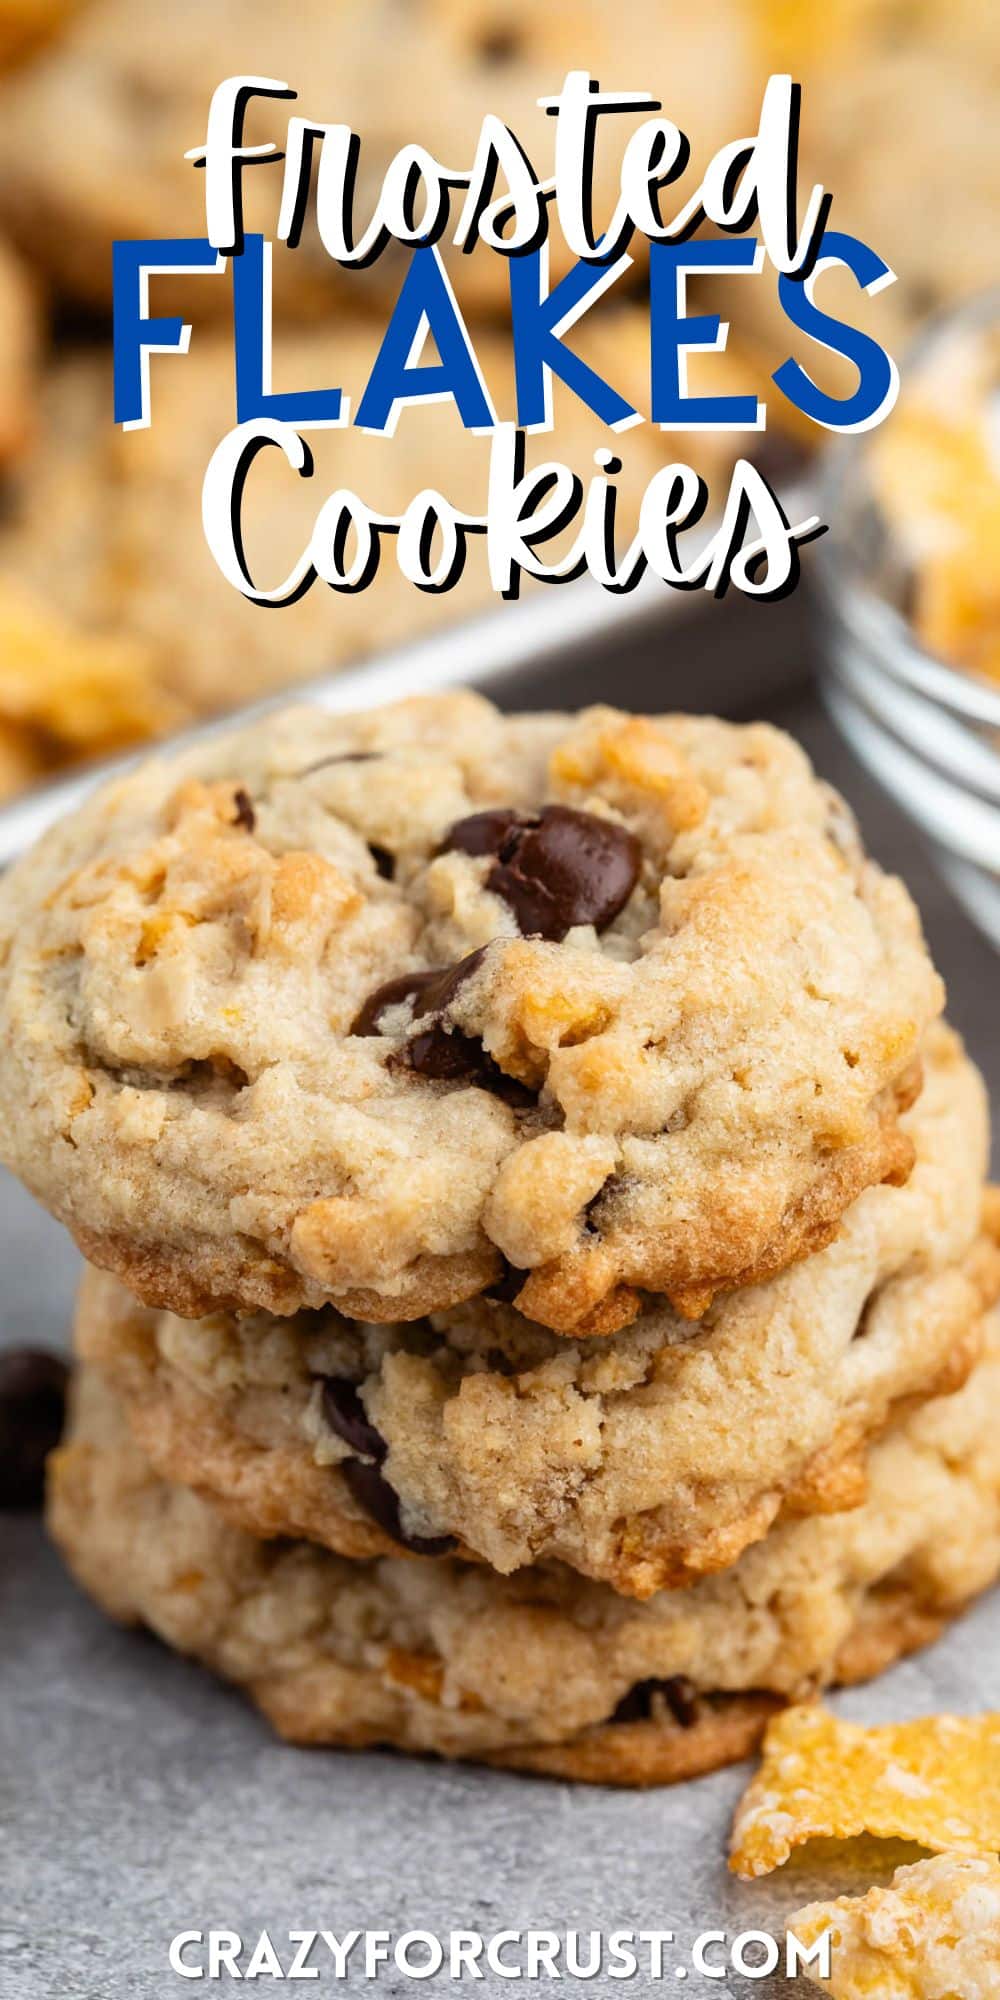 stacked cookies with Frosted Flakes and chocolate chips baked with words on the image.